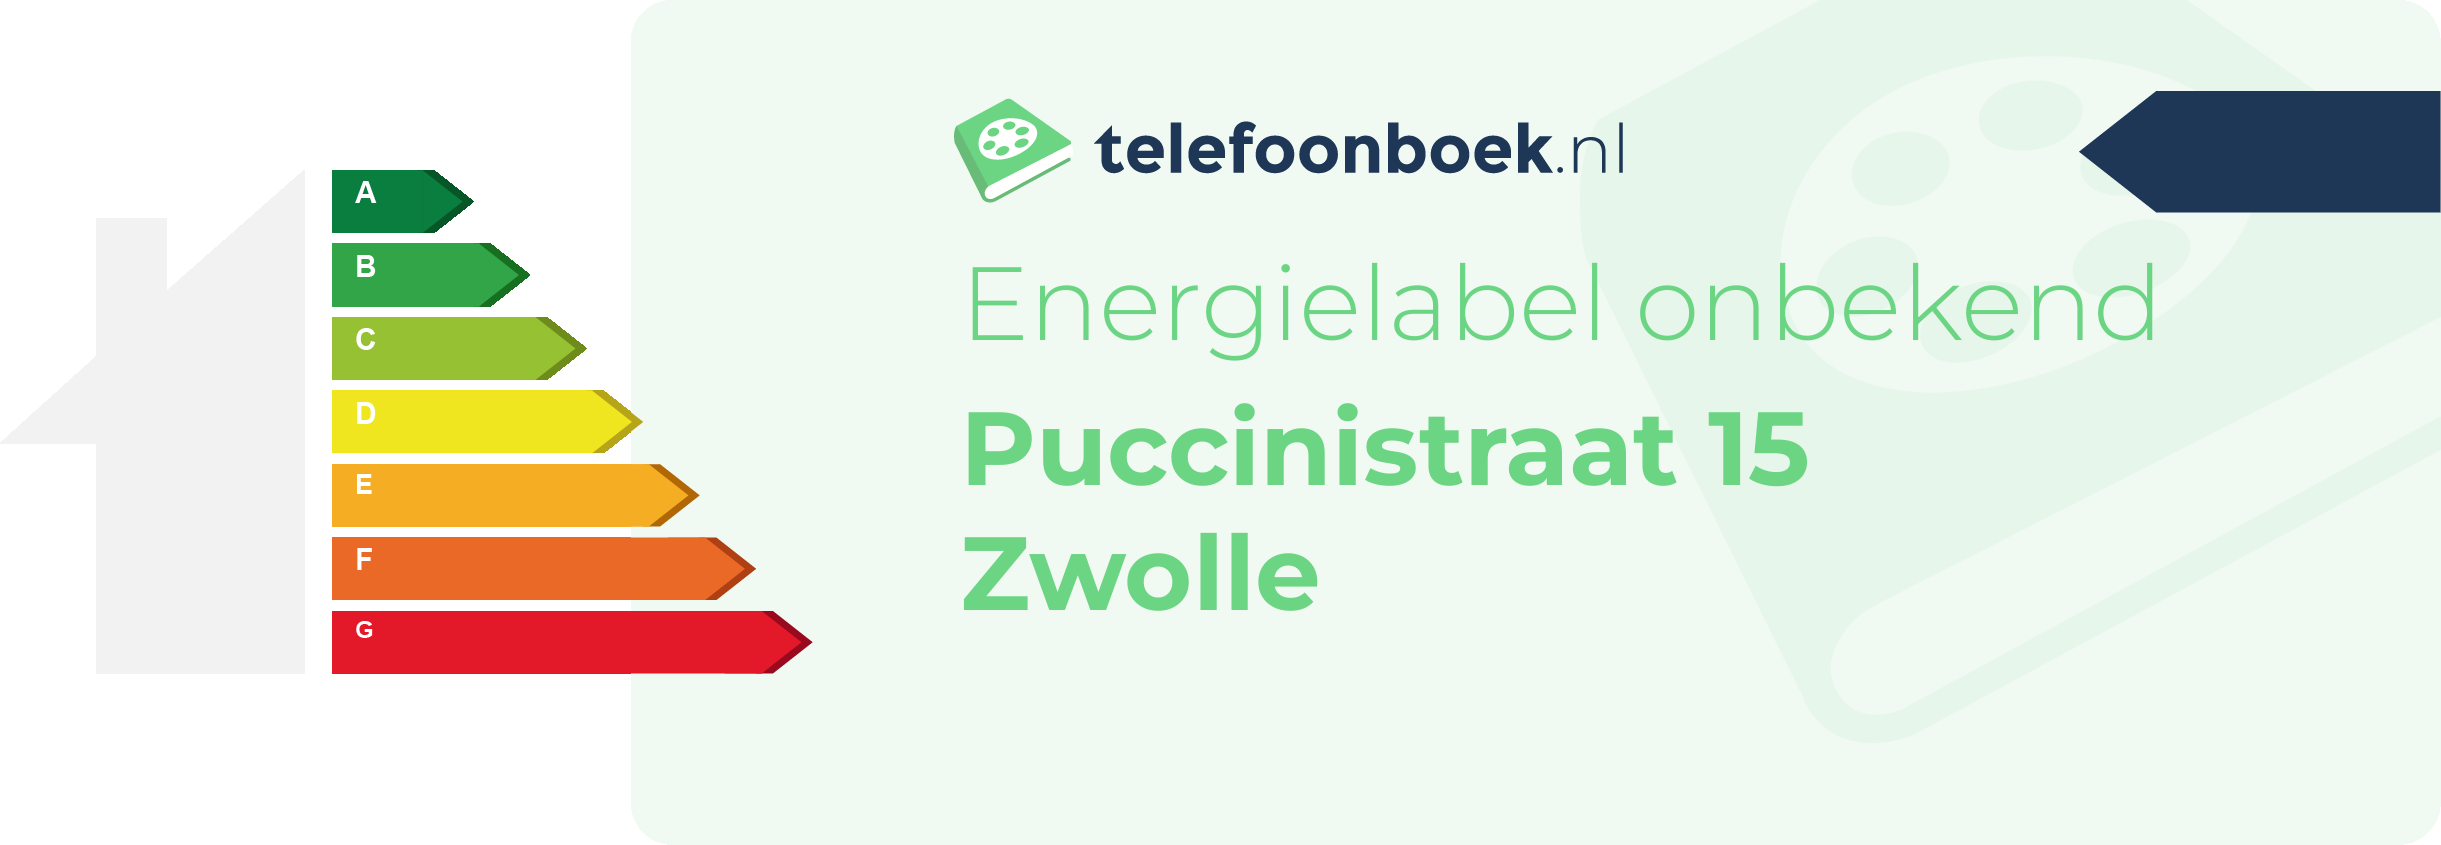 Energielabel Puccinistraat 15 Zwolle